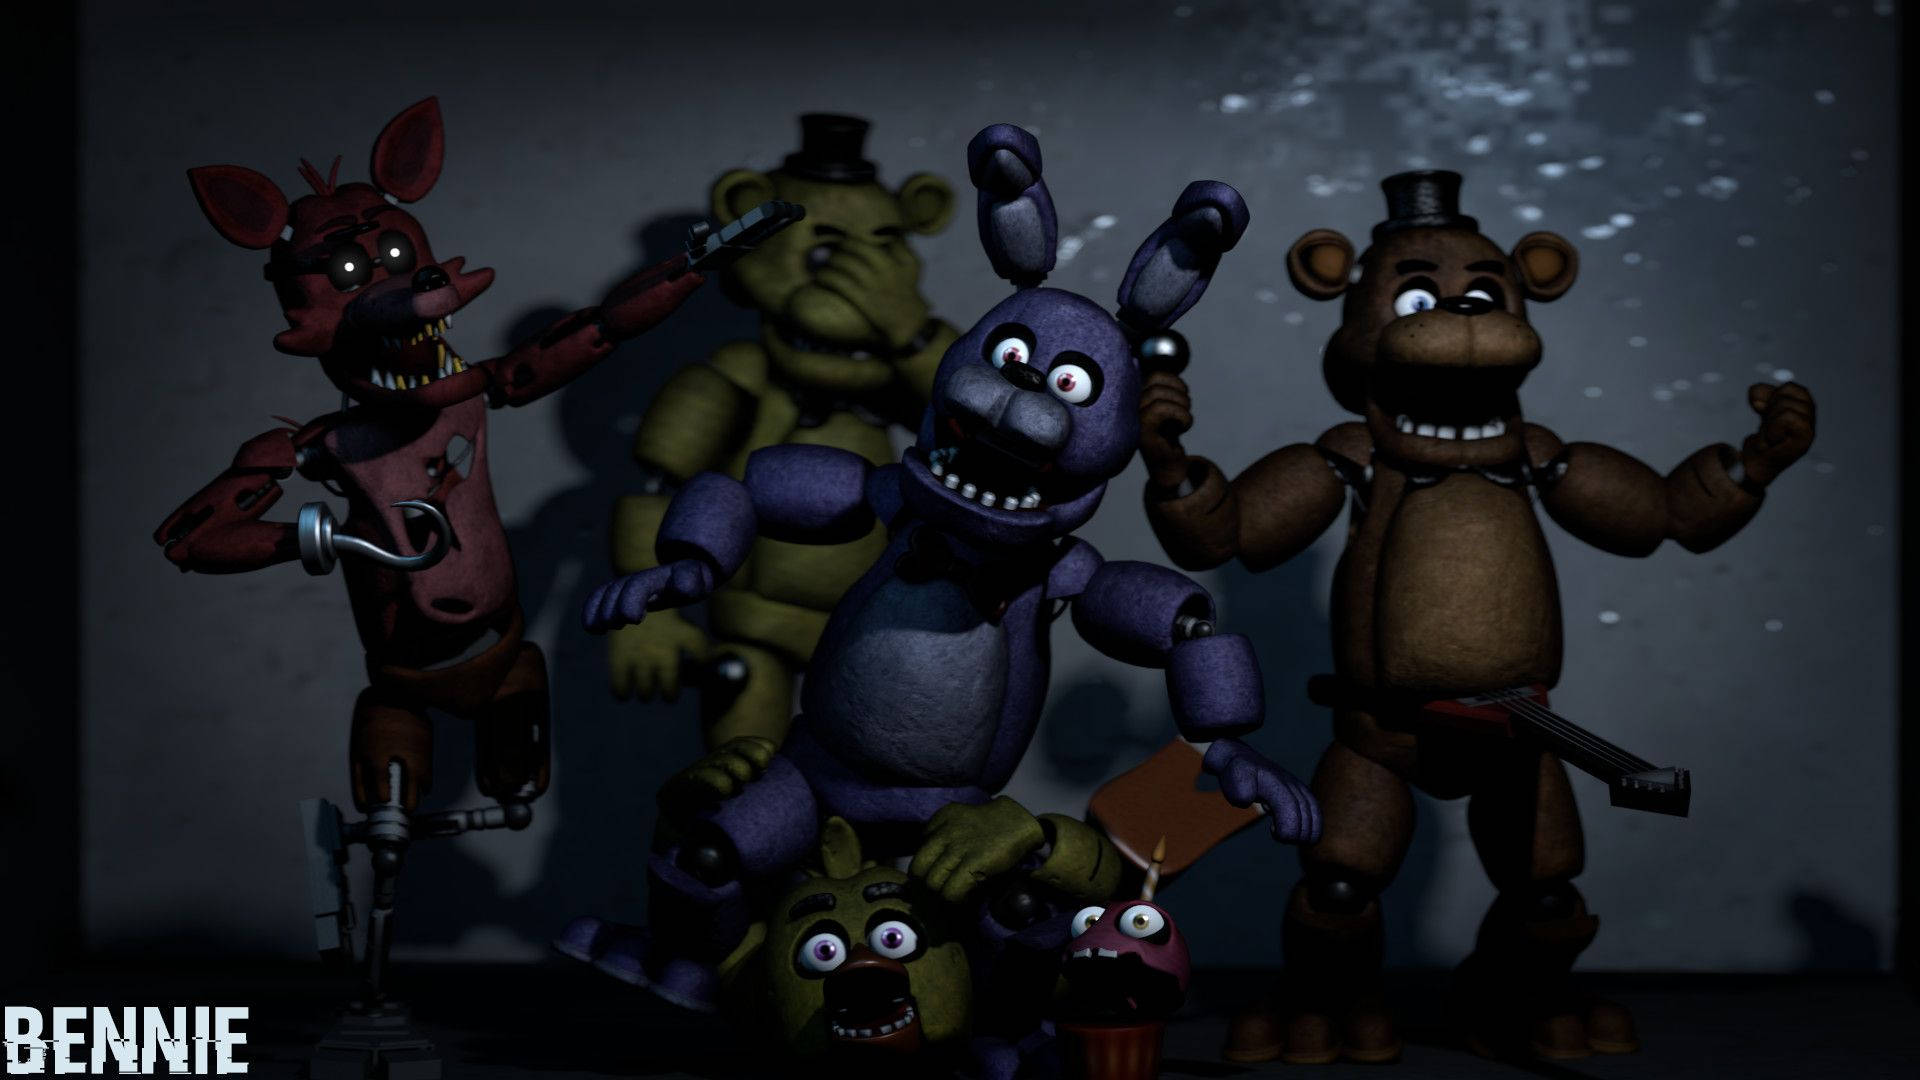 “It’s time to party! The Five Nights at Freddy's Animatronics are ready to get the show started.” Wallpaper